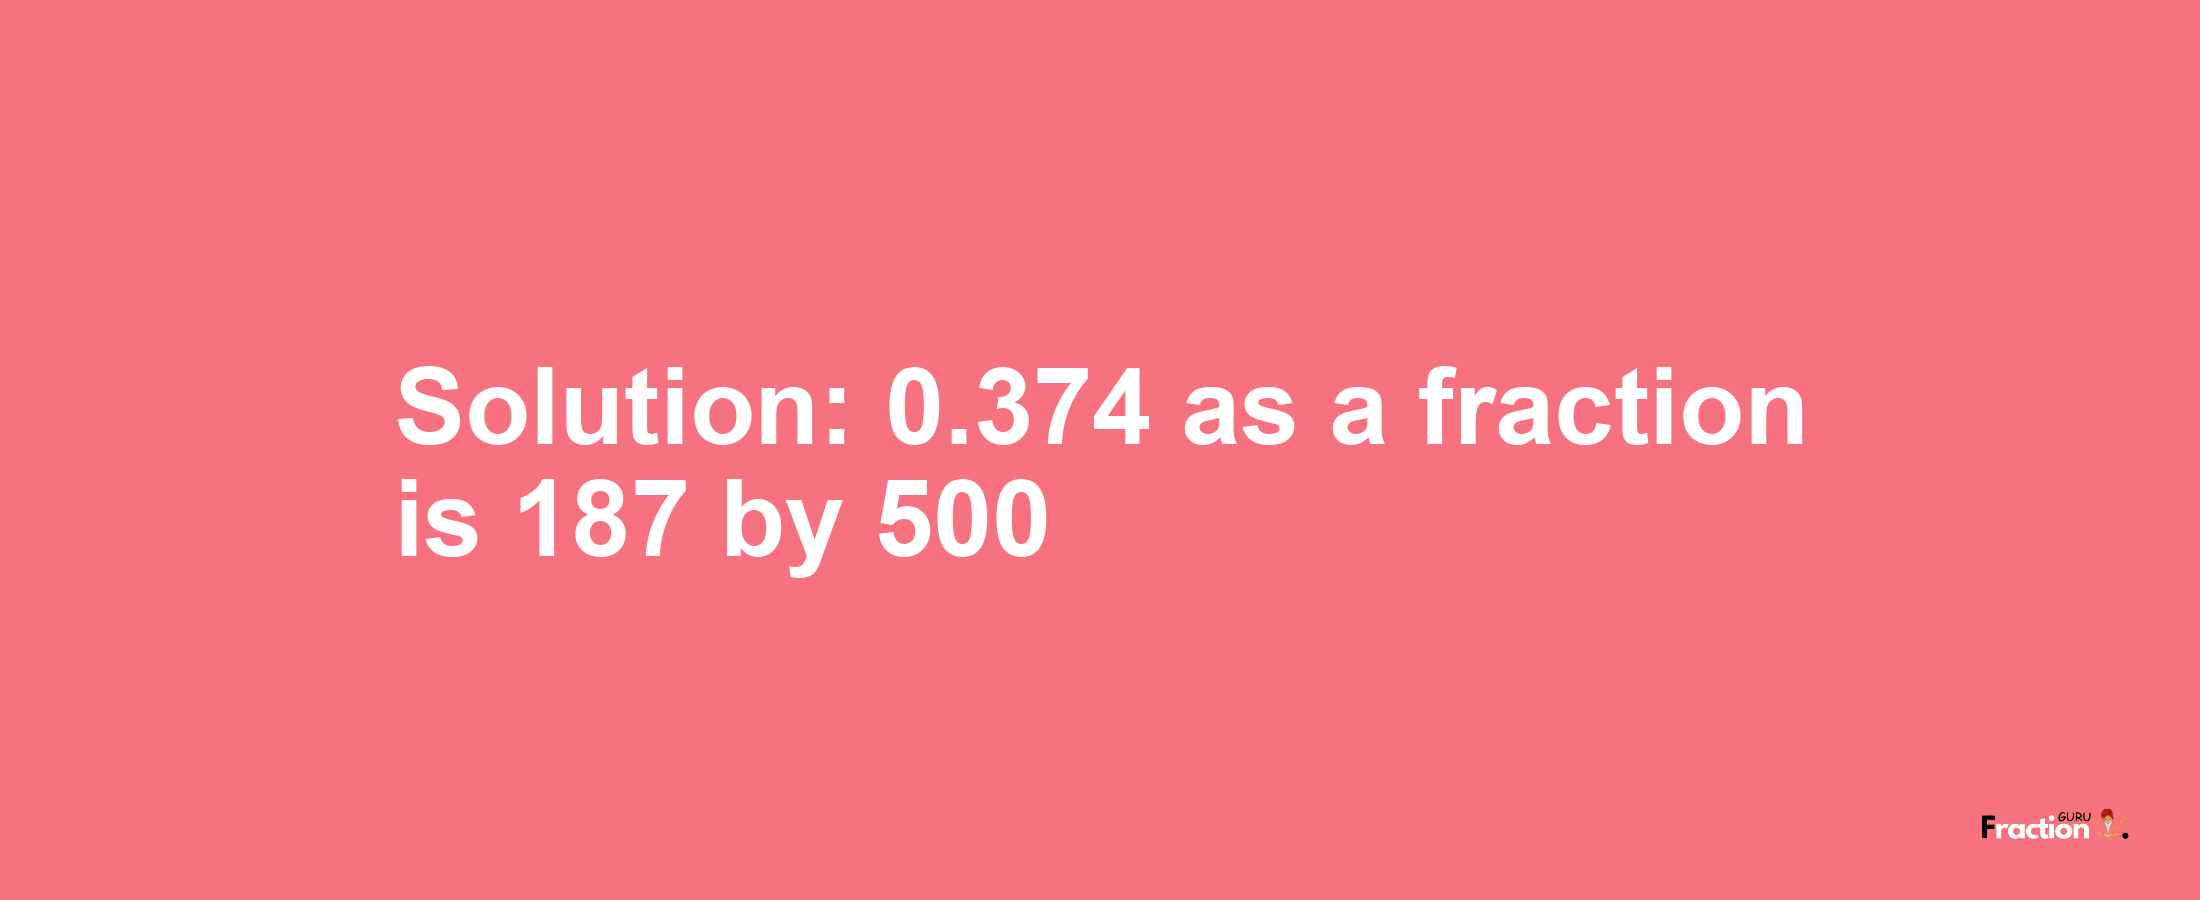 Solution:0.374 as a fraction is 187/500